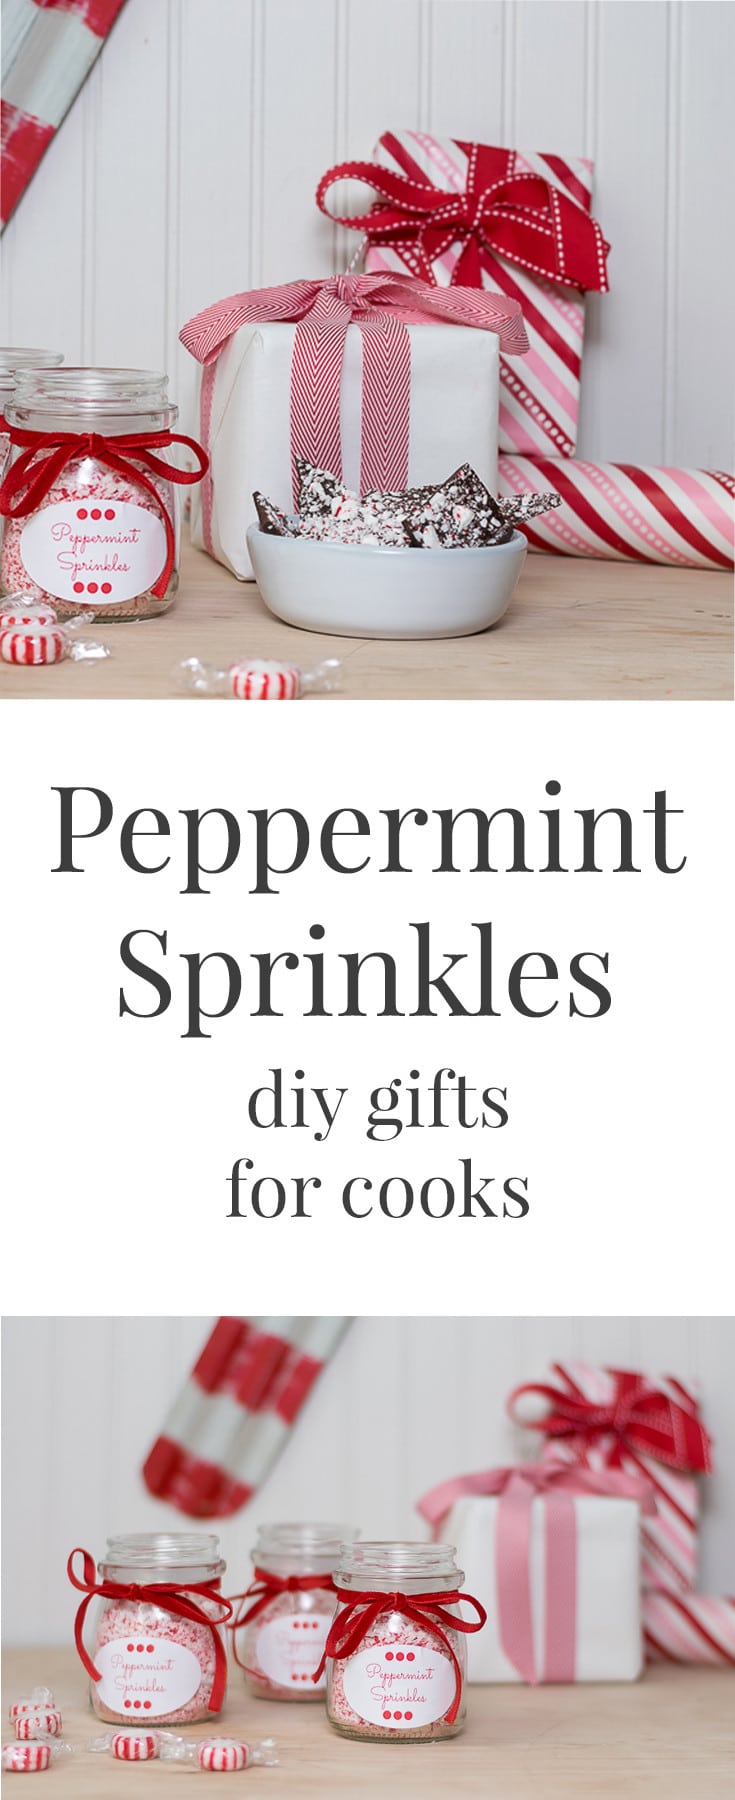 I love making gifts from my kitchen for the holidays. These Peppermint Sprinkles are so easy to make but will be so appreciated by busy cooks this Christmas. One of three ideas or easy recipes for DIY gifts for cooks.